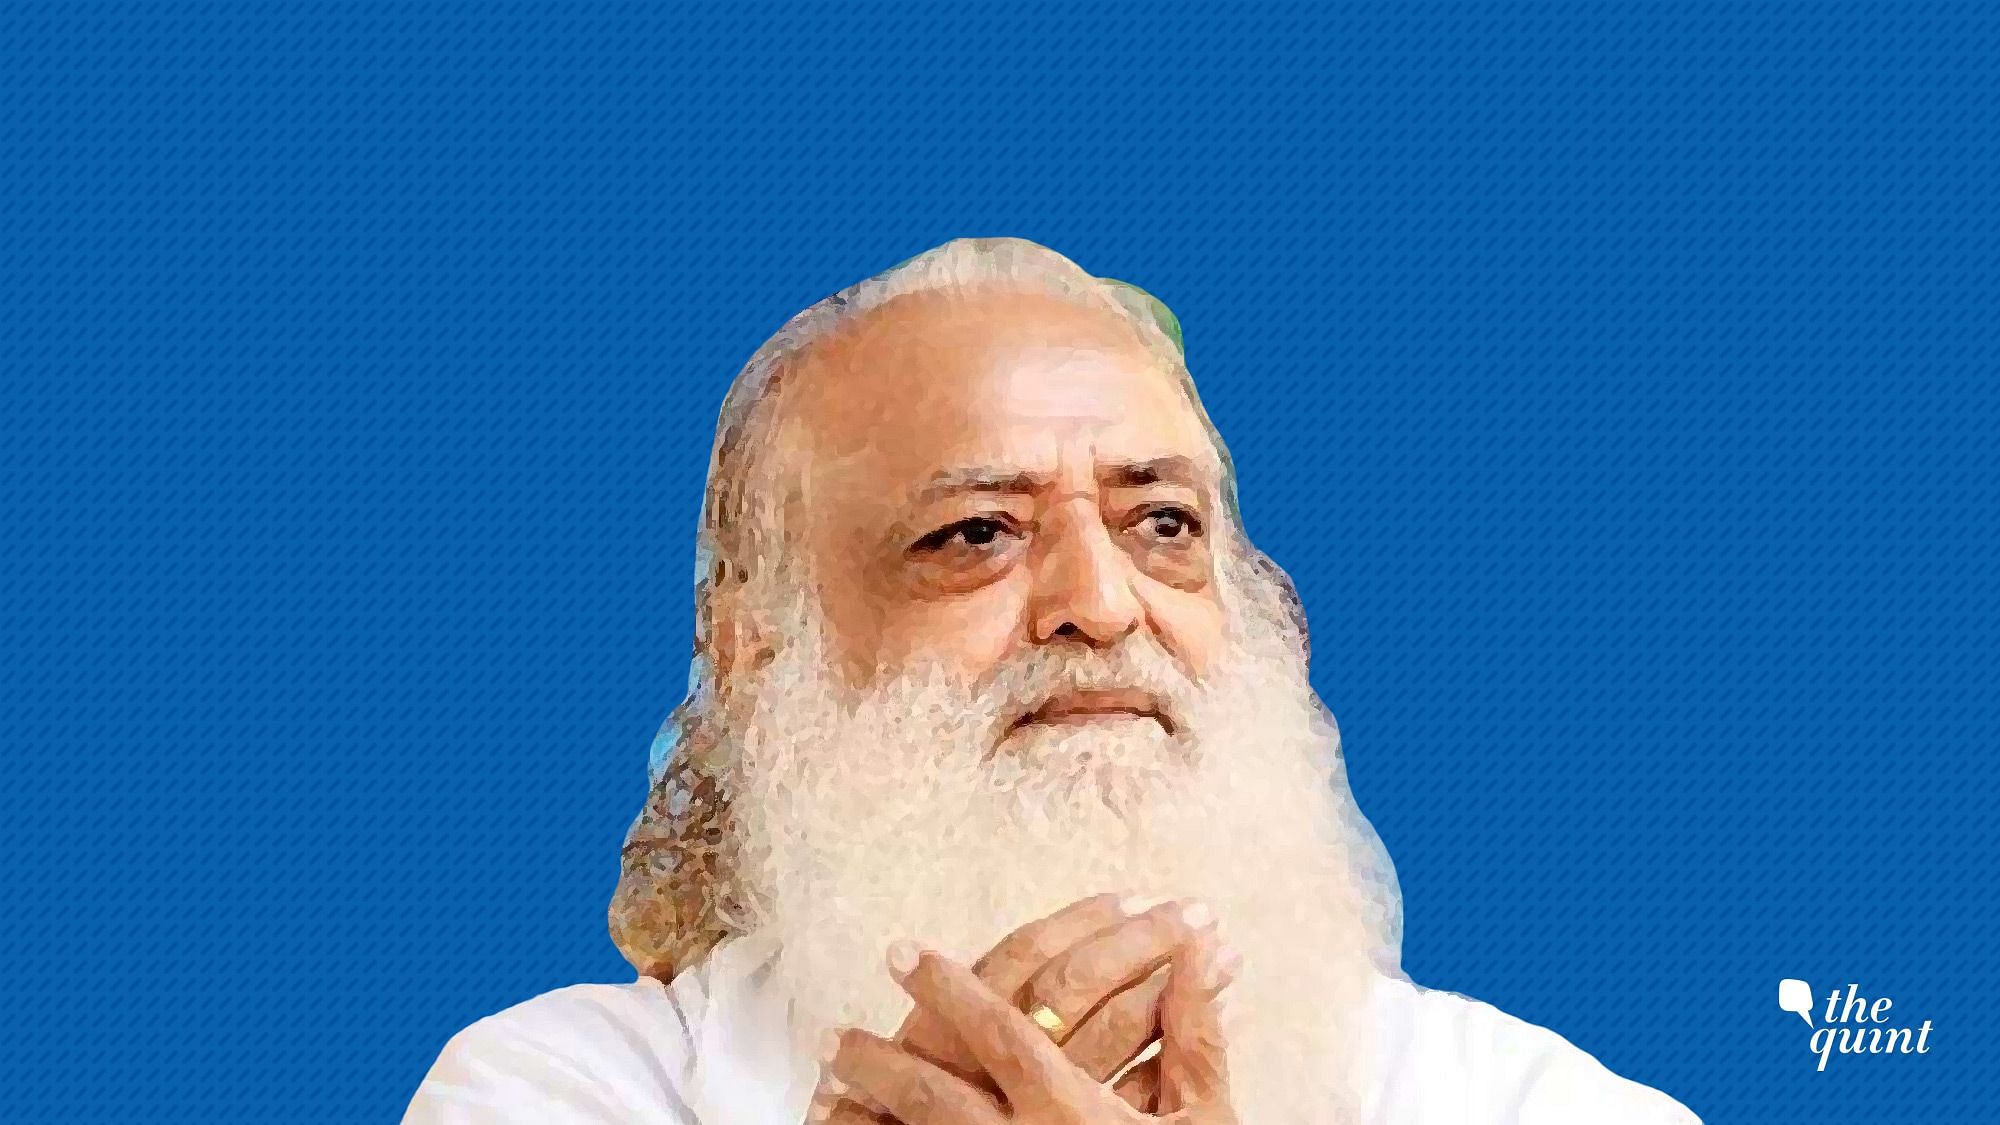 In 2008, decomposed bodies of cousins studying at Asaram’s ‘Gurukul’ were found on the bank of the Sabarmati river.